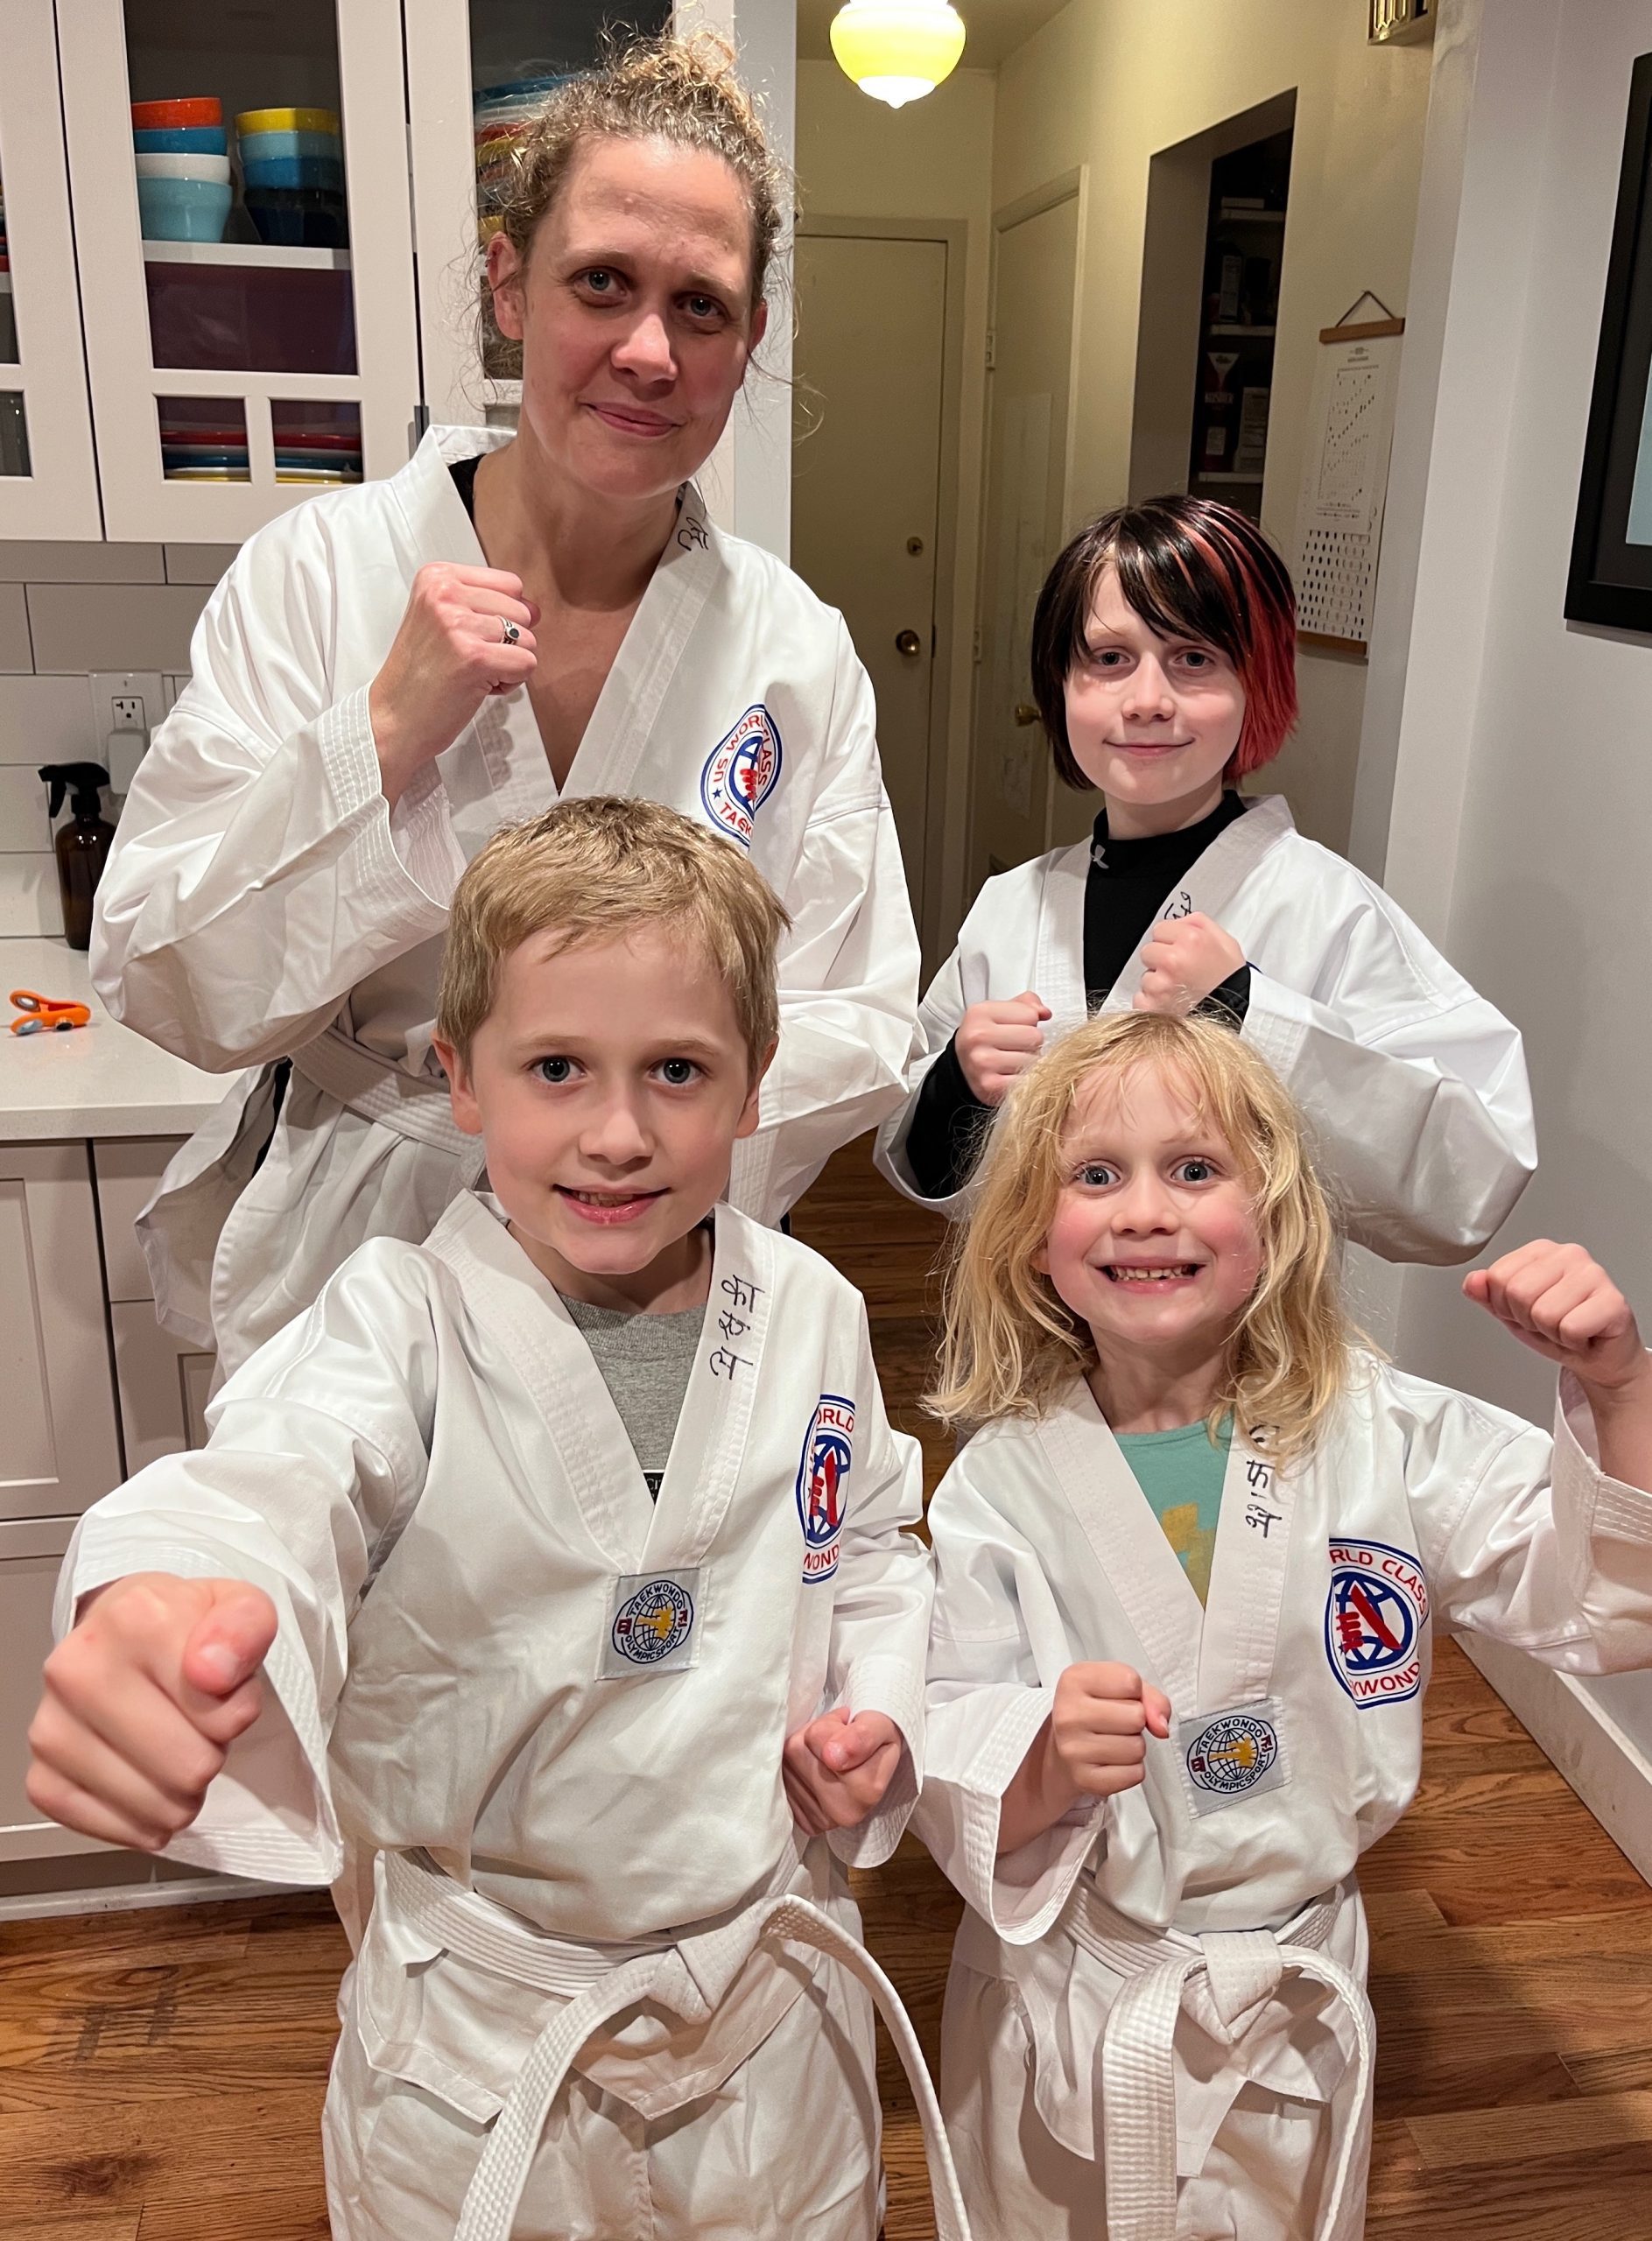 Family poses for picture before Taekwondo class in white belts